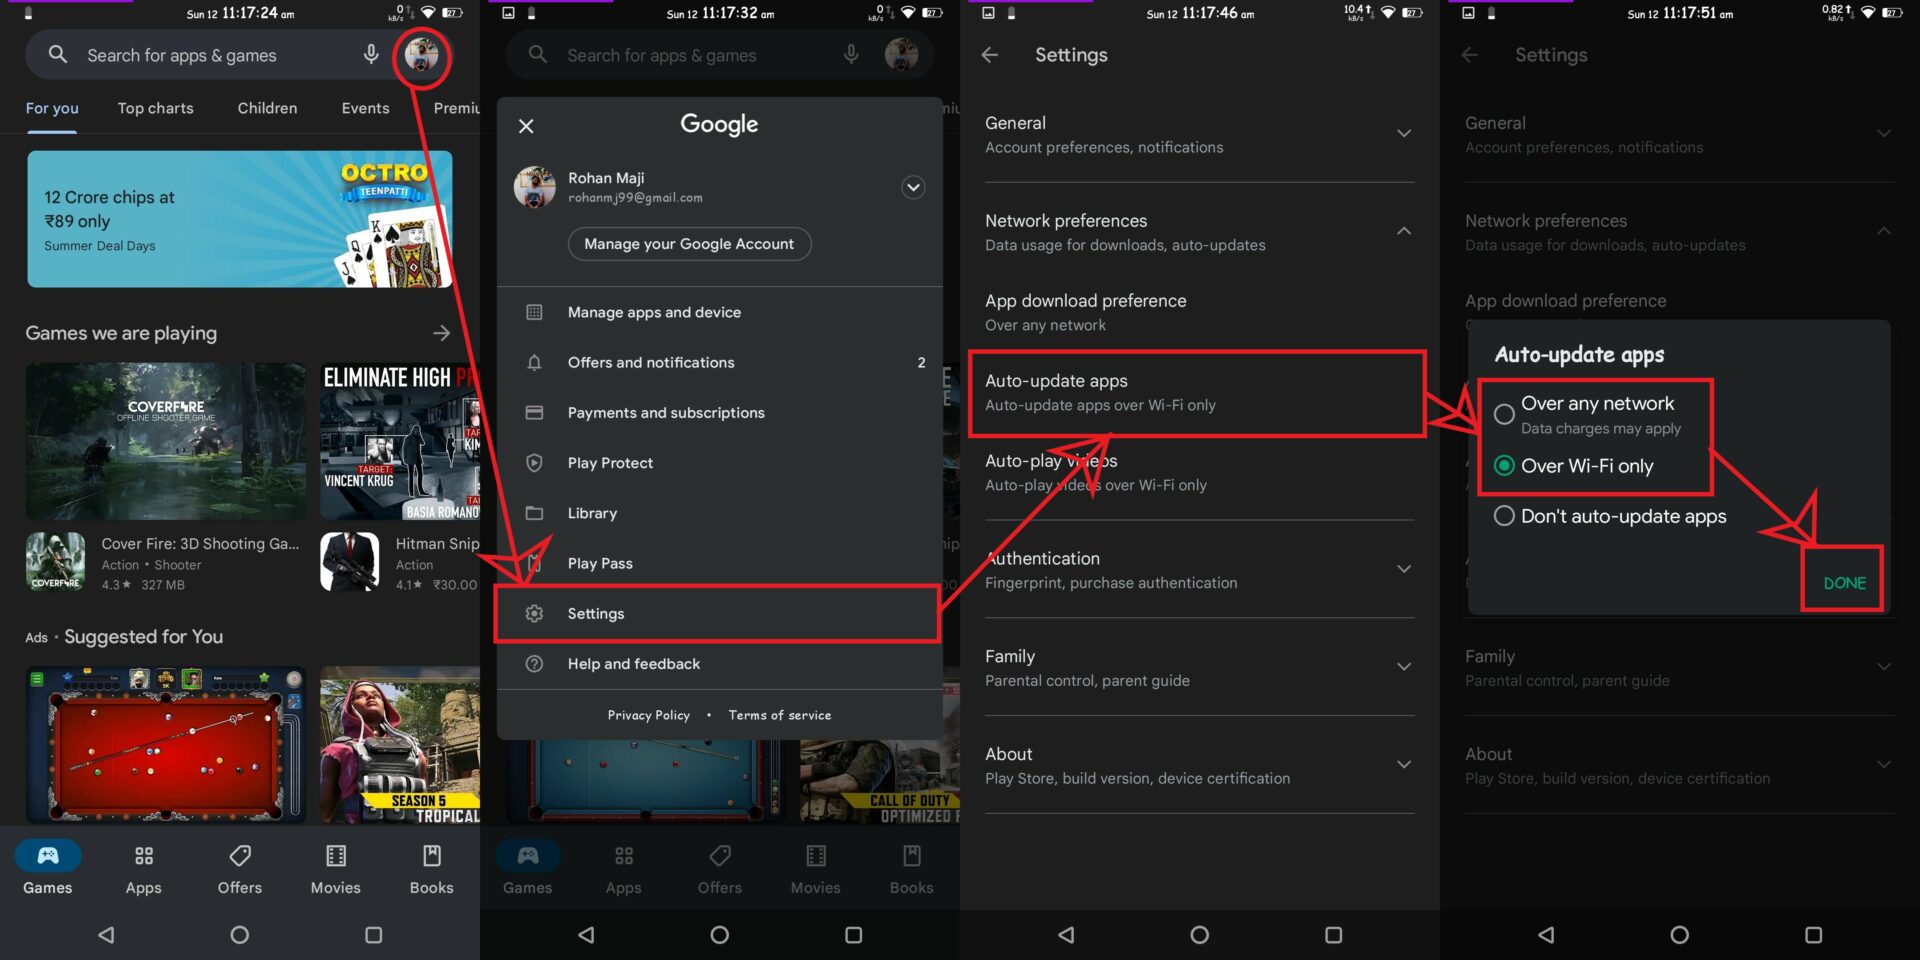 Enable automatic app updates in Android to Update Snapchat